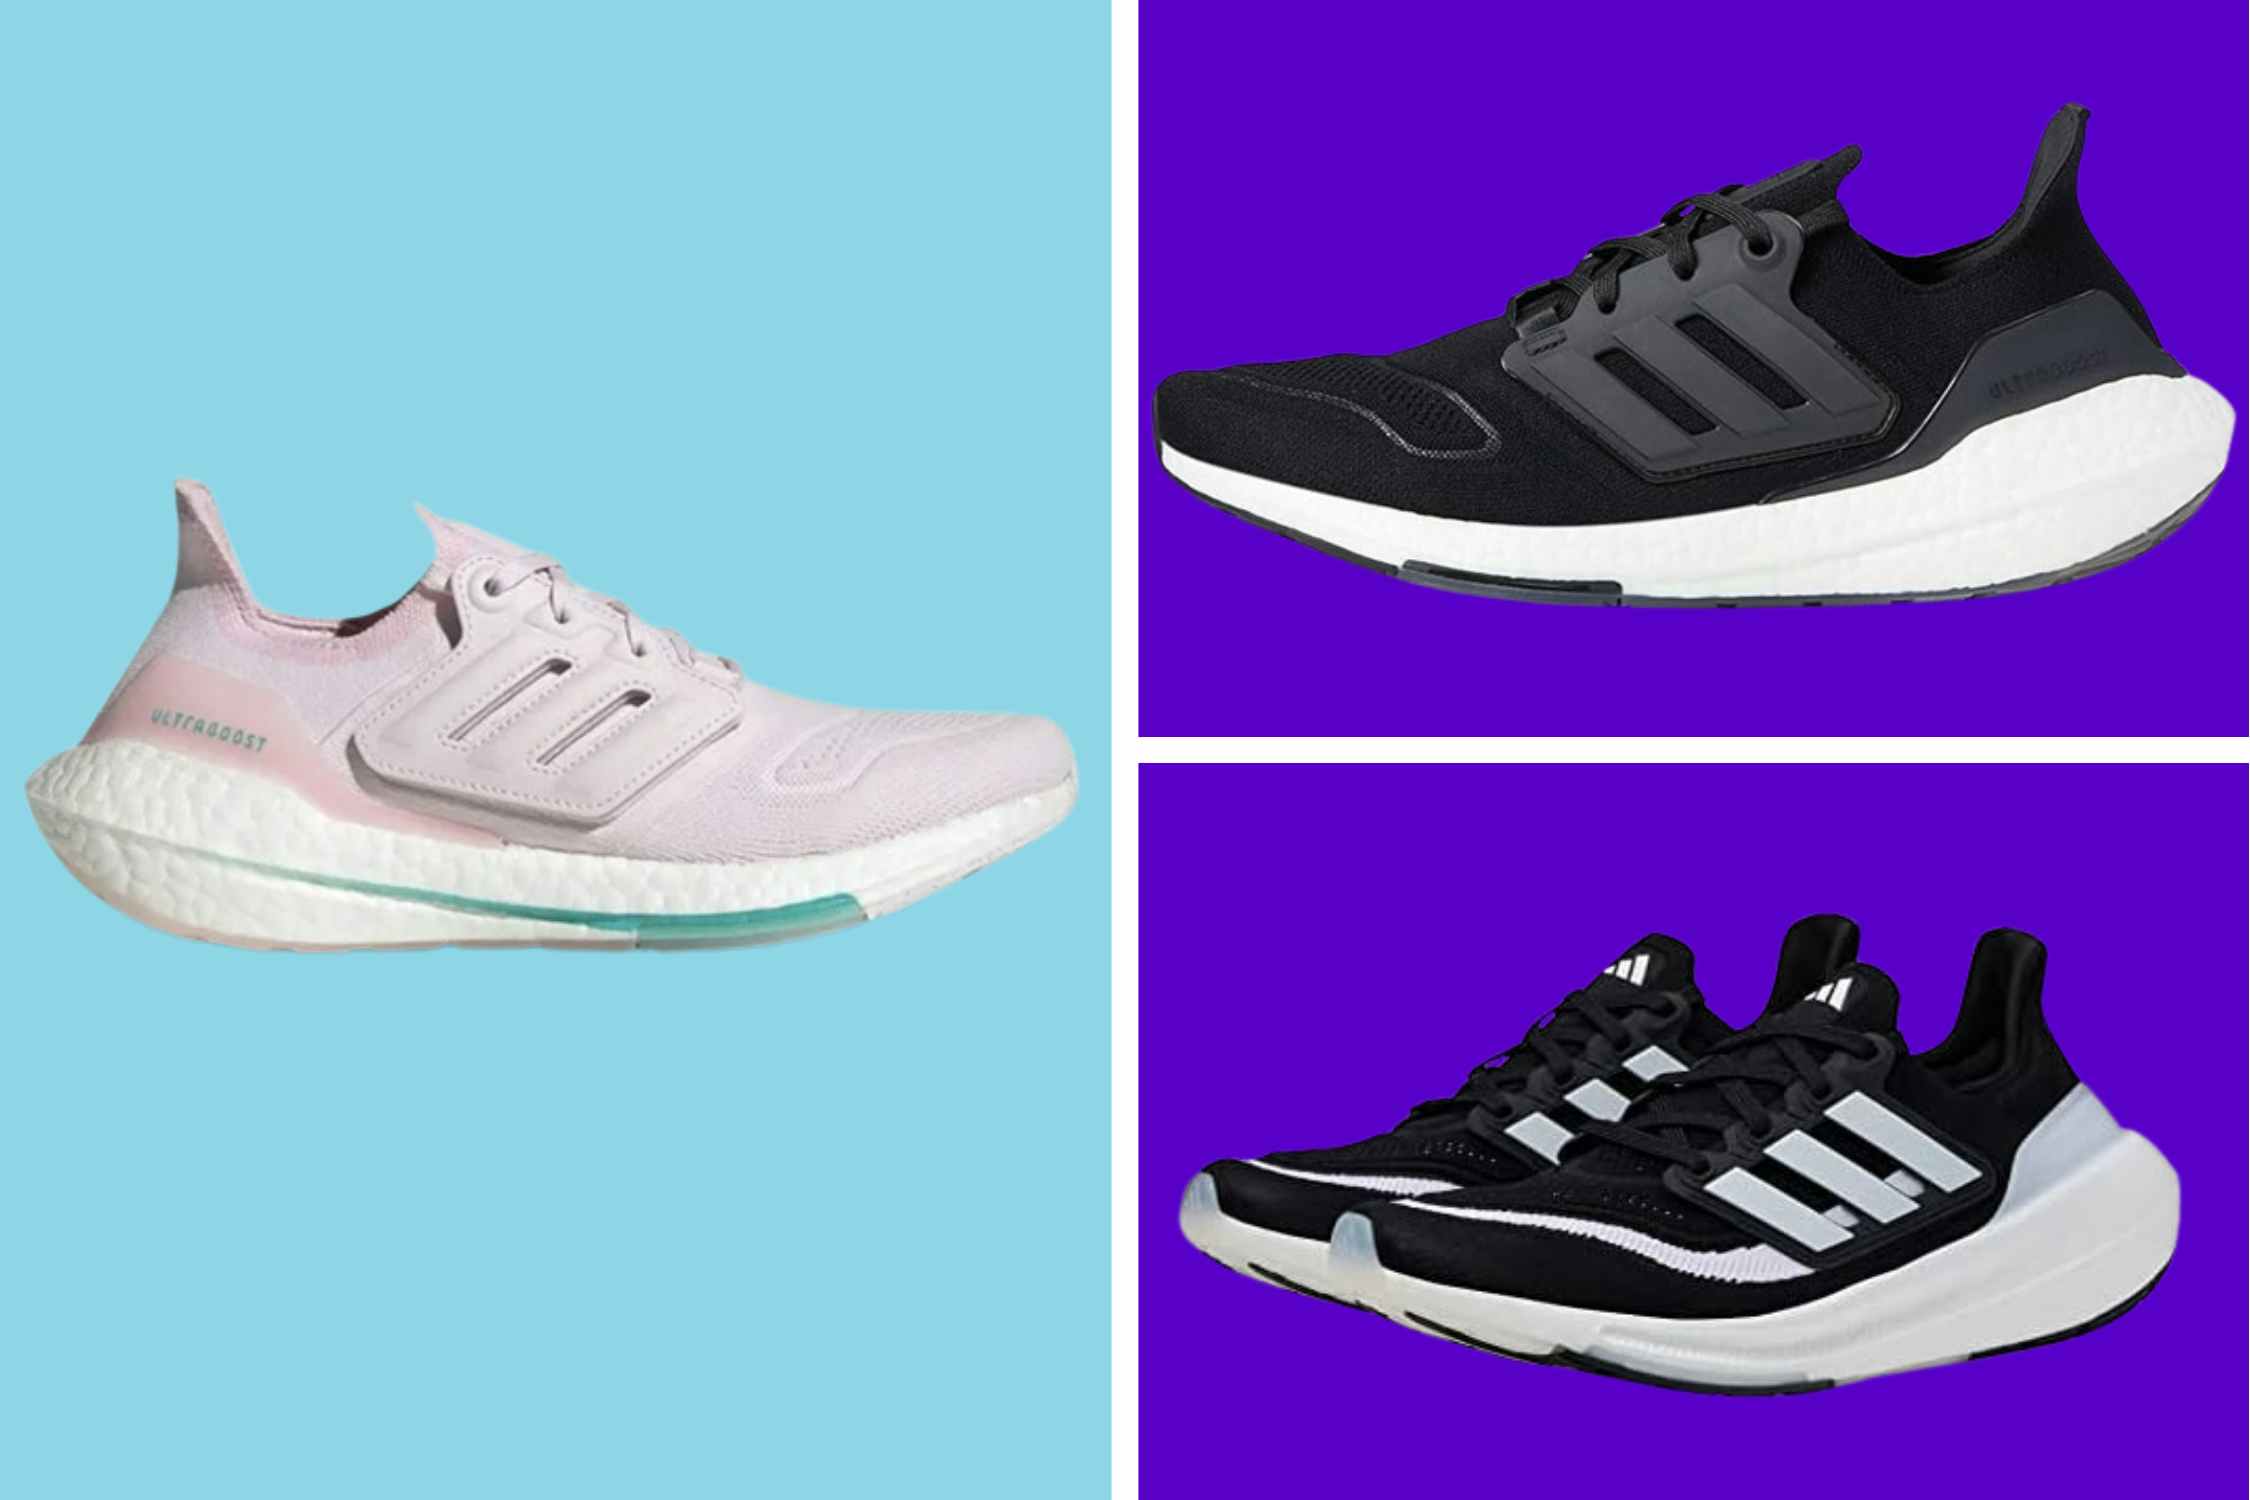 Adidas Ultraboost Shoes, Starting at $67.99 With Amazon Prime (Reg. $190)